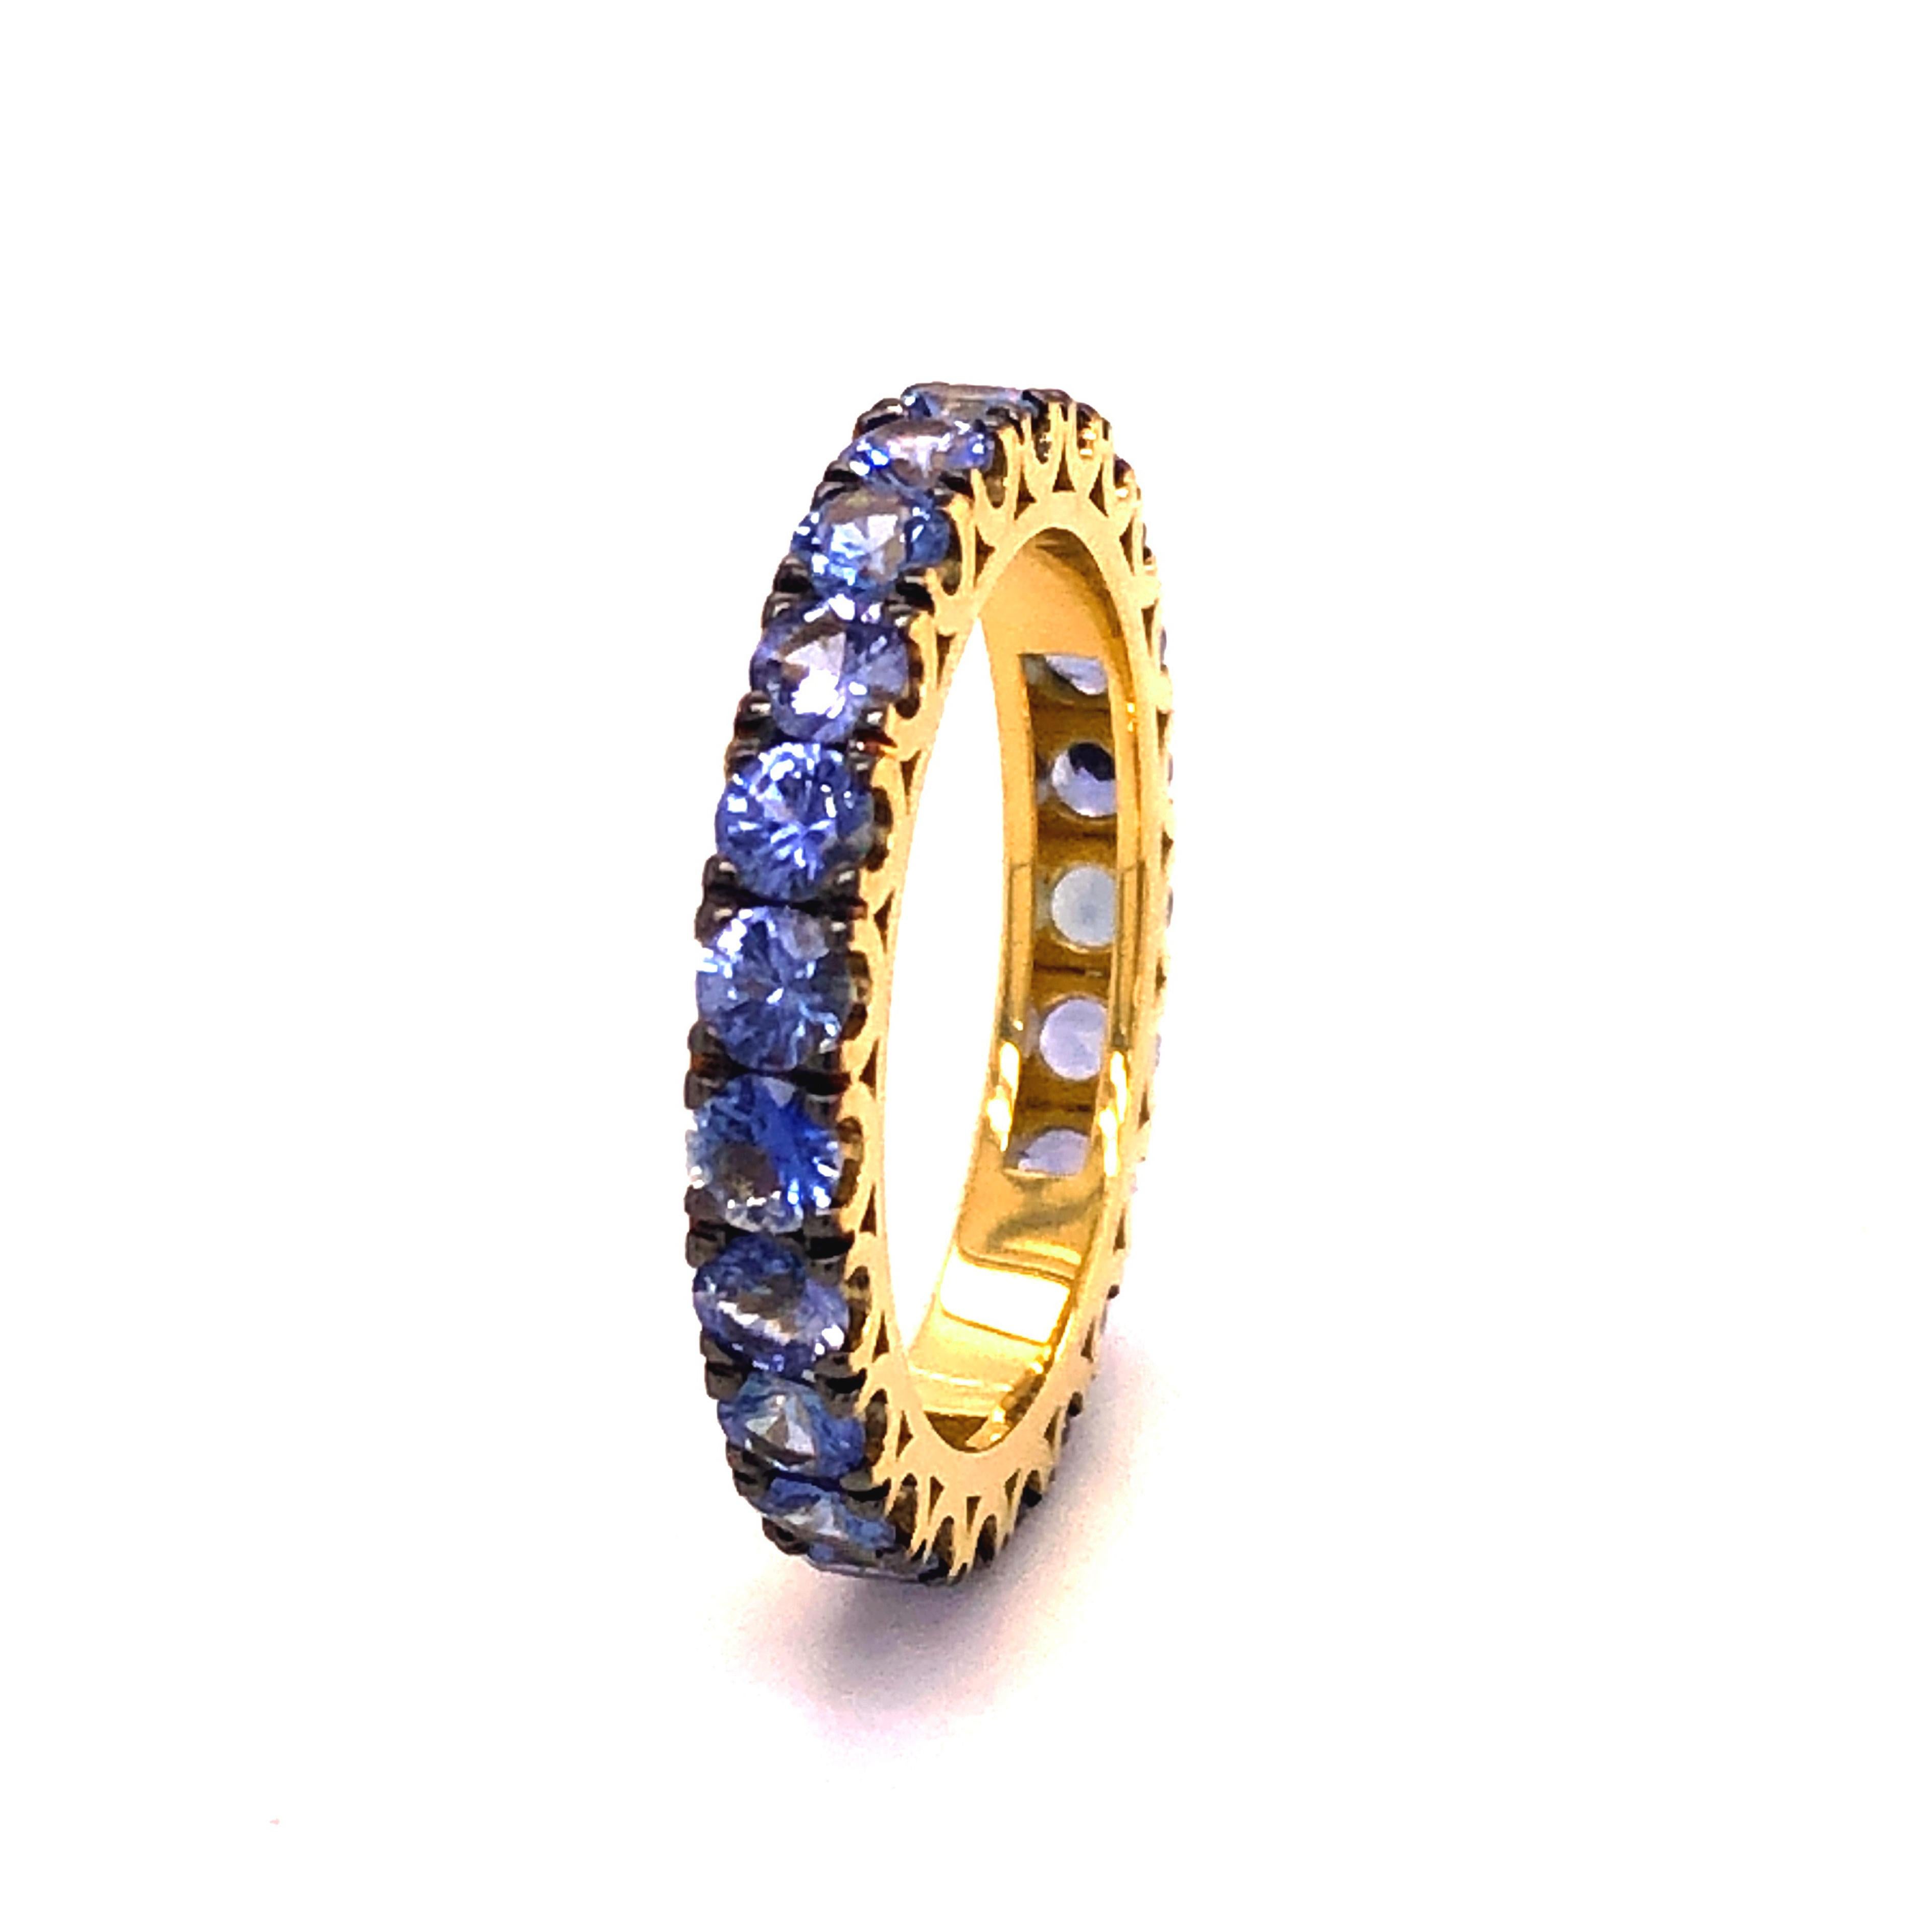 Beautifully hand crafted Eternity Band featuring 23 round brilliant cut Natural Ceylon Blue Sapphire for a total weight of 2.24 Carat in an 18Kt Yellow Gold fish tail, blackened prongs, setting.
US Size 6
French Size 52
In our fitted burgundy